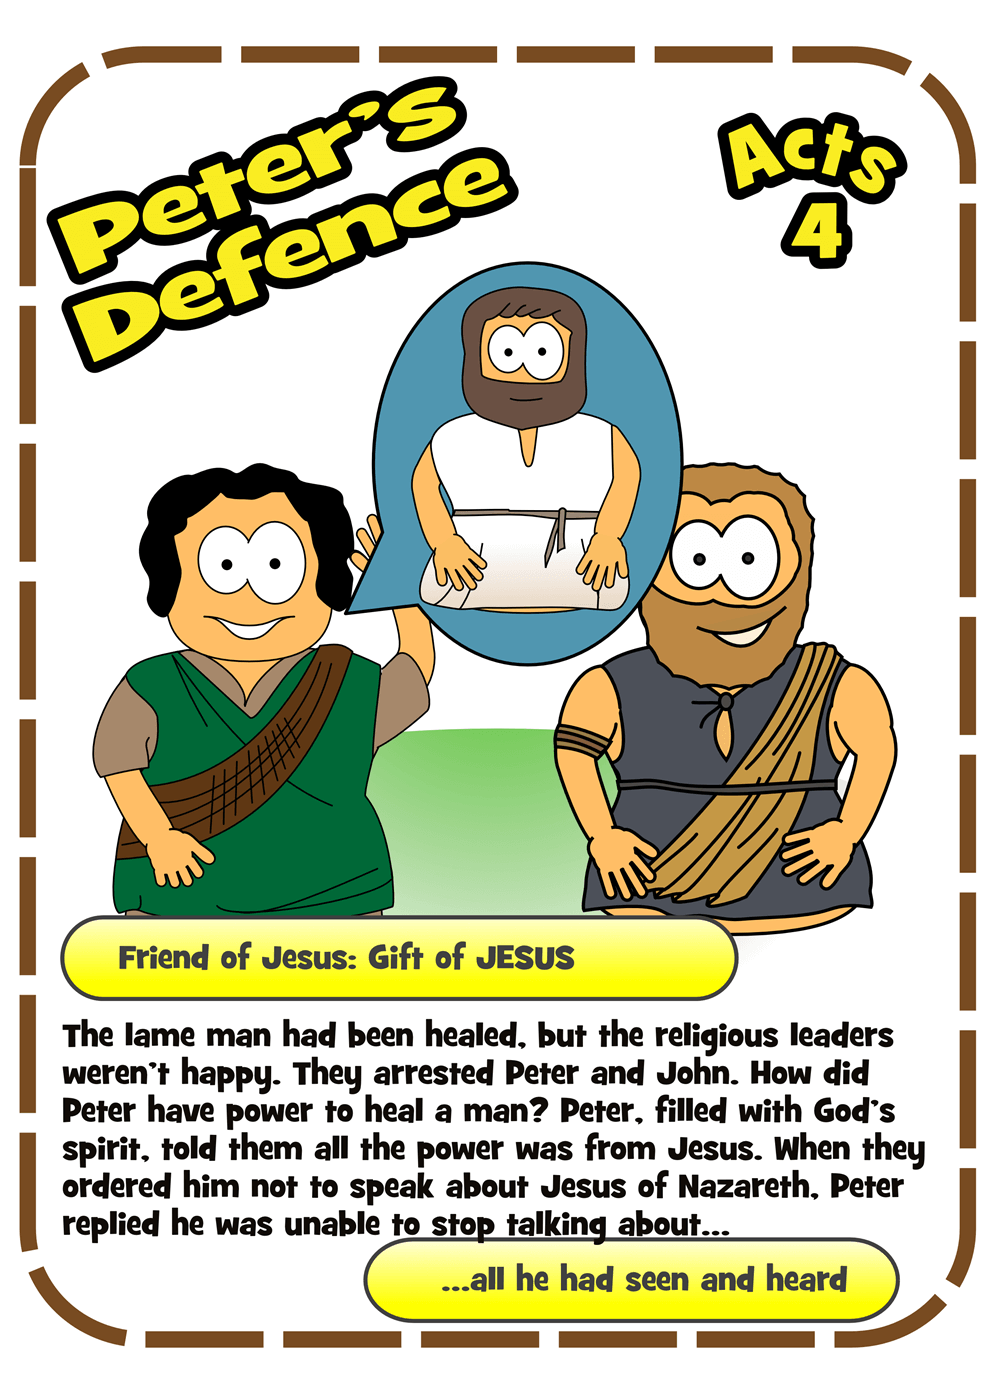 120-Peter-defence-card